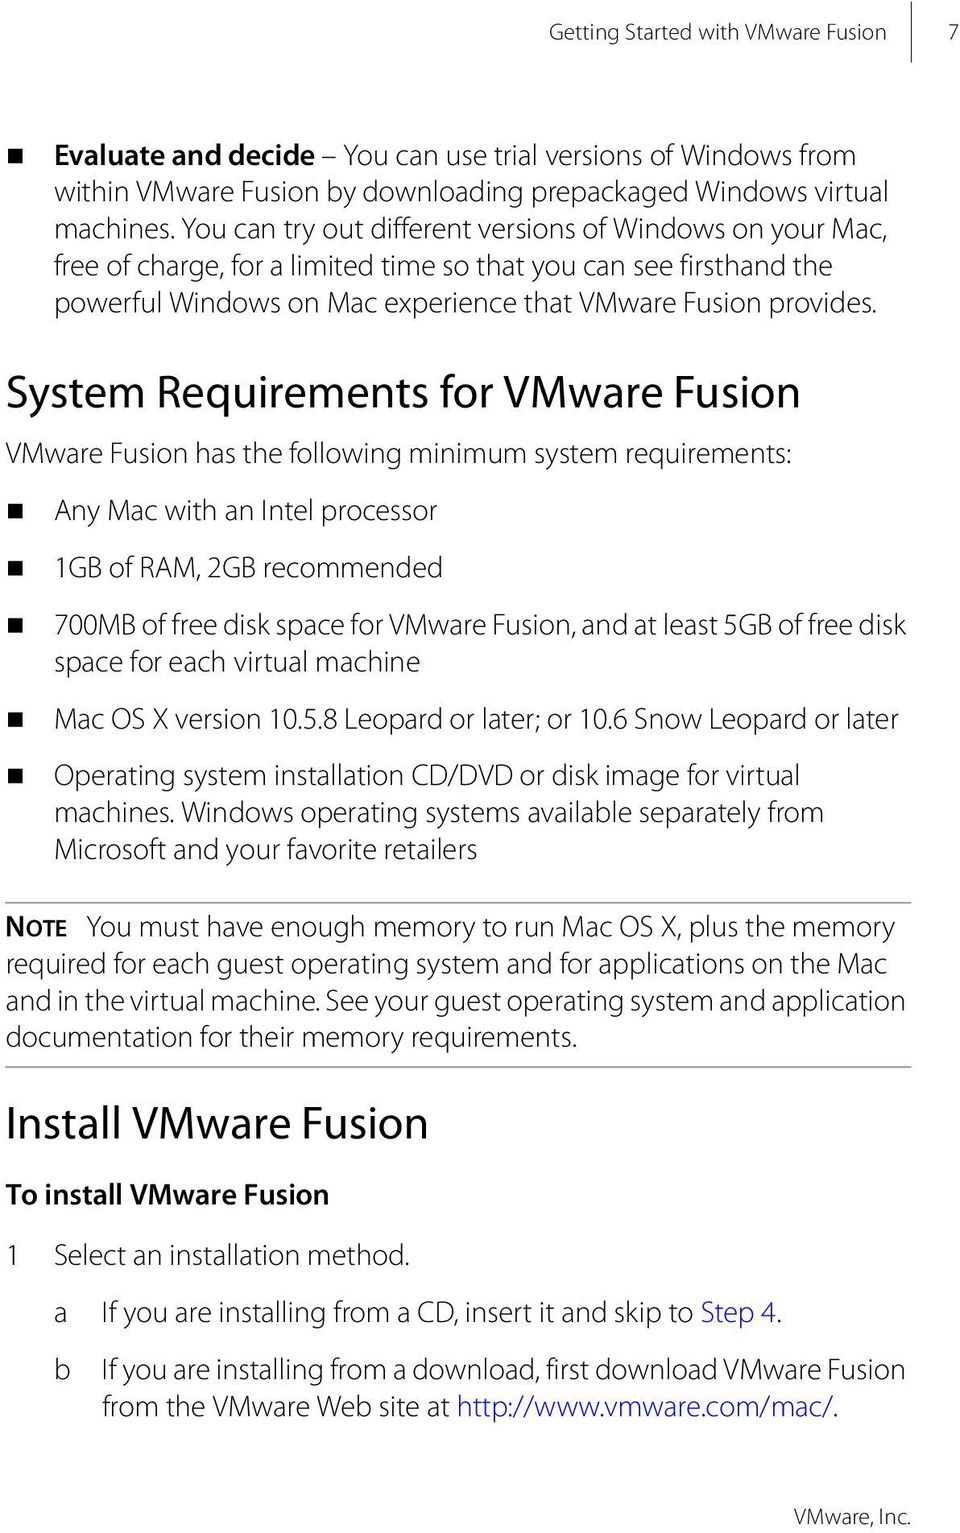 System Requirements for VMware Fusion VMware Fusion has the following minimum system requirements: Any Mac with an Intel processor 1GB of RAM, 2GB recommended 700MB of free disk space for VMware